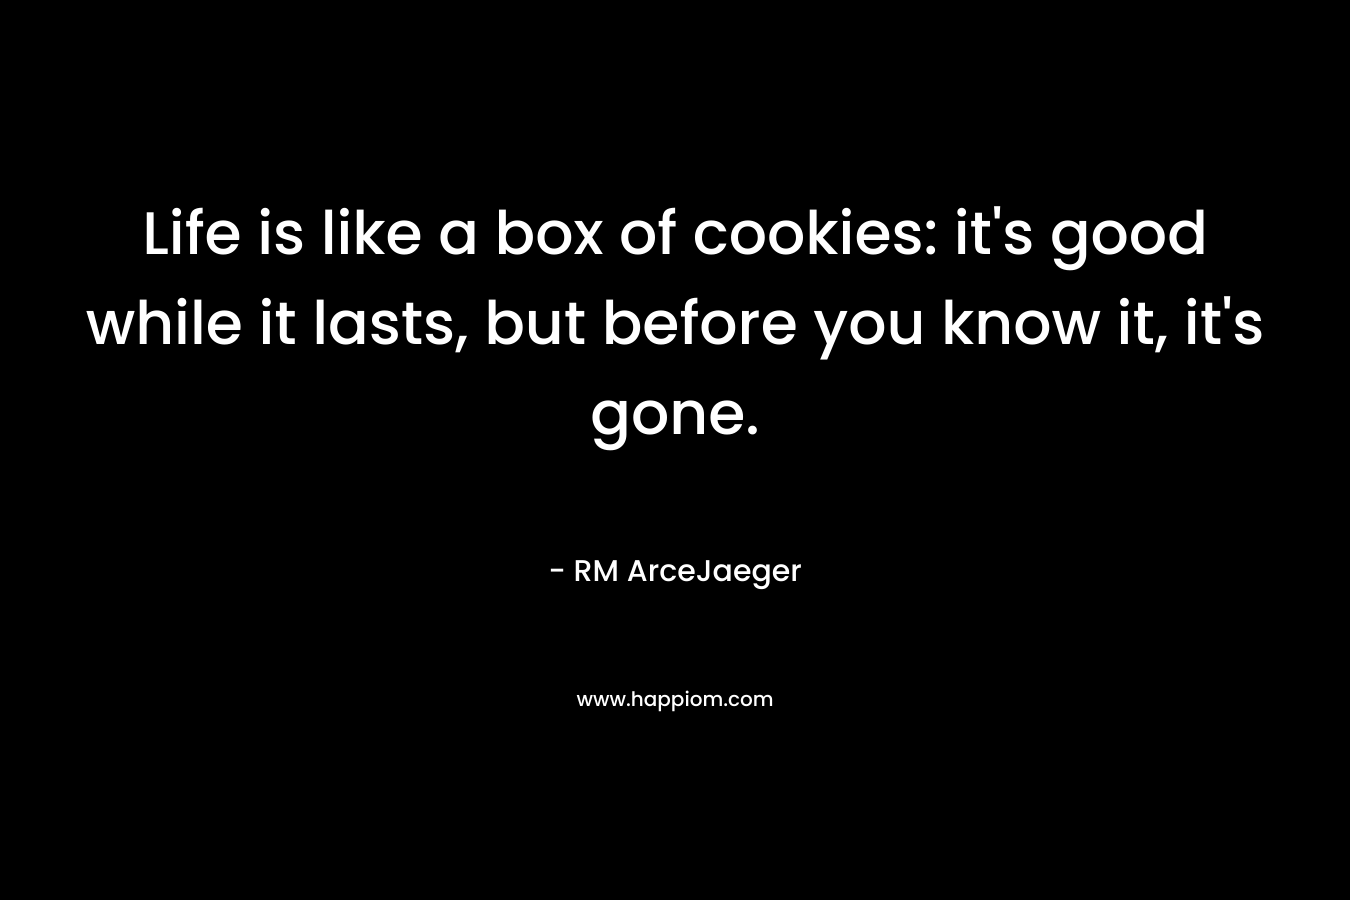 Life is like a box of cookies: it’s good while it lasts, but before you know it, it’s gone. – RM ArceJaeger